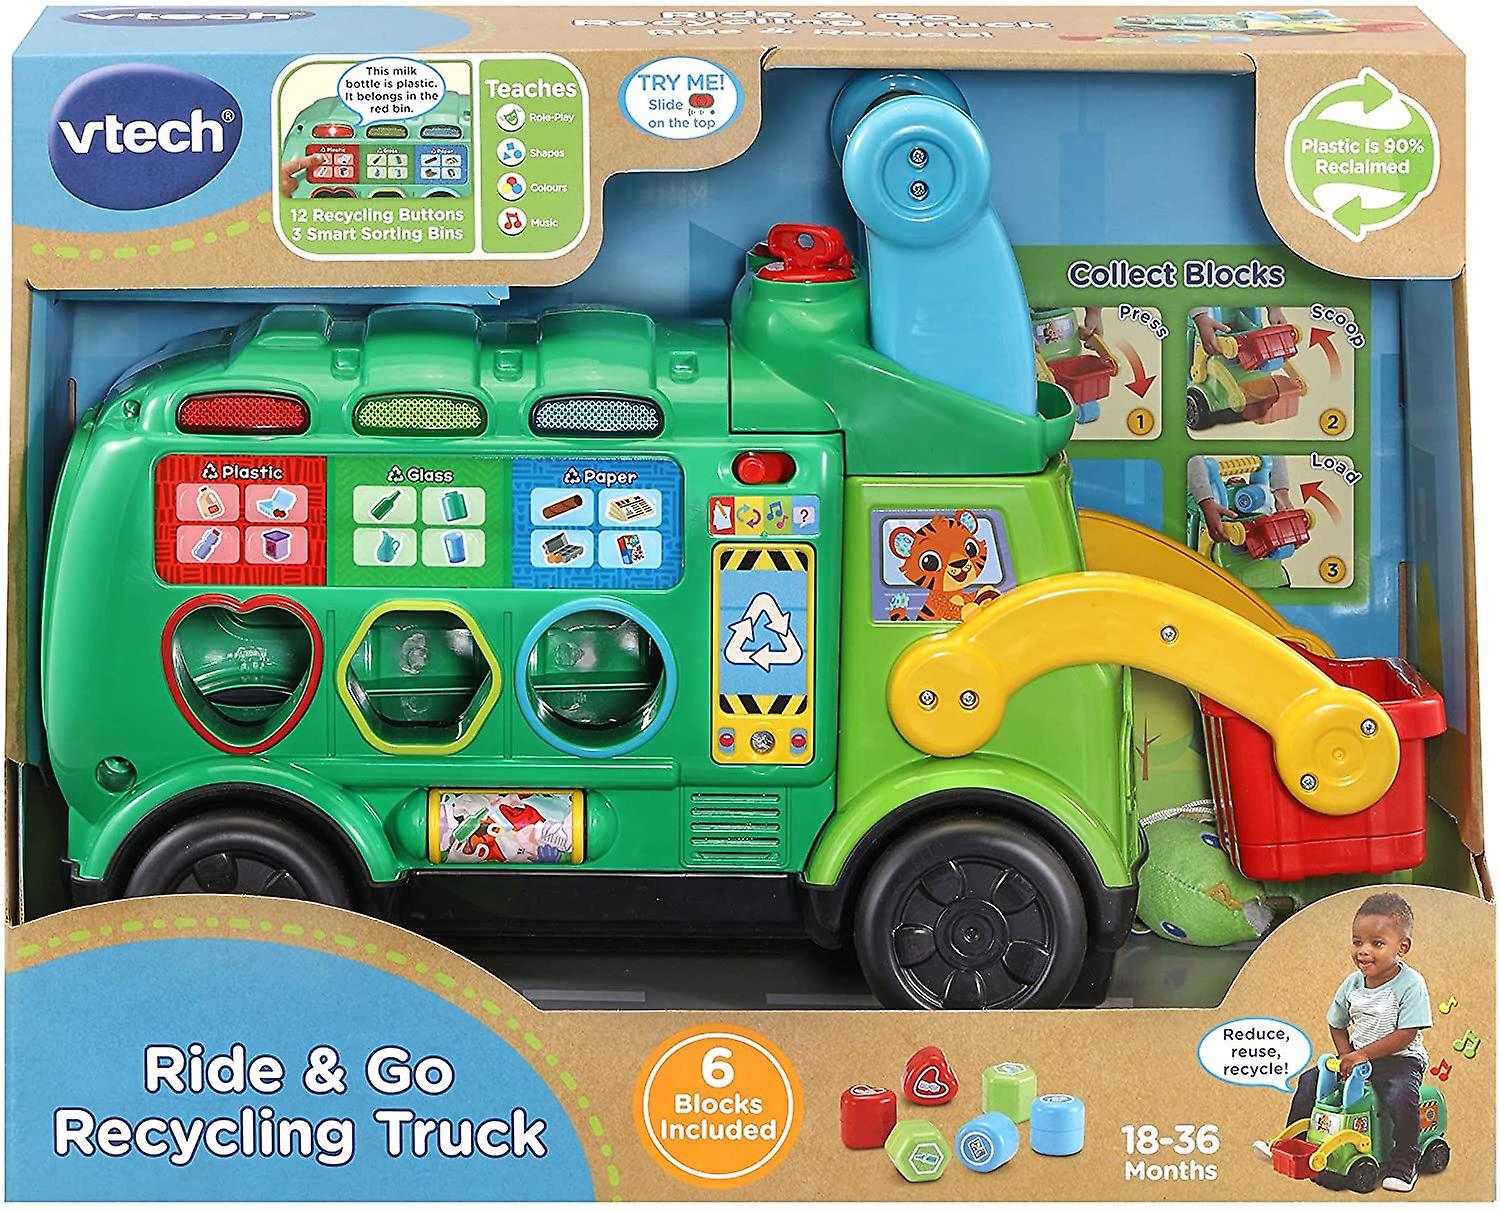 Ride & Go Recycling Truck